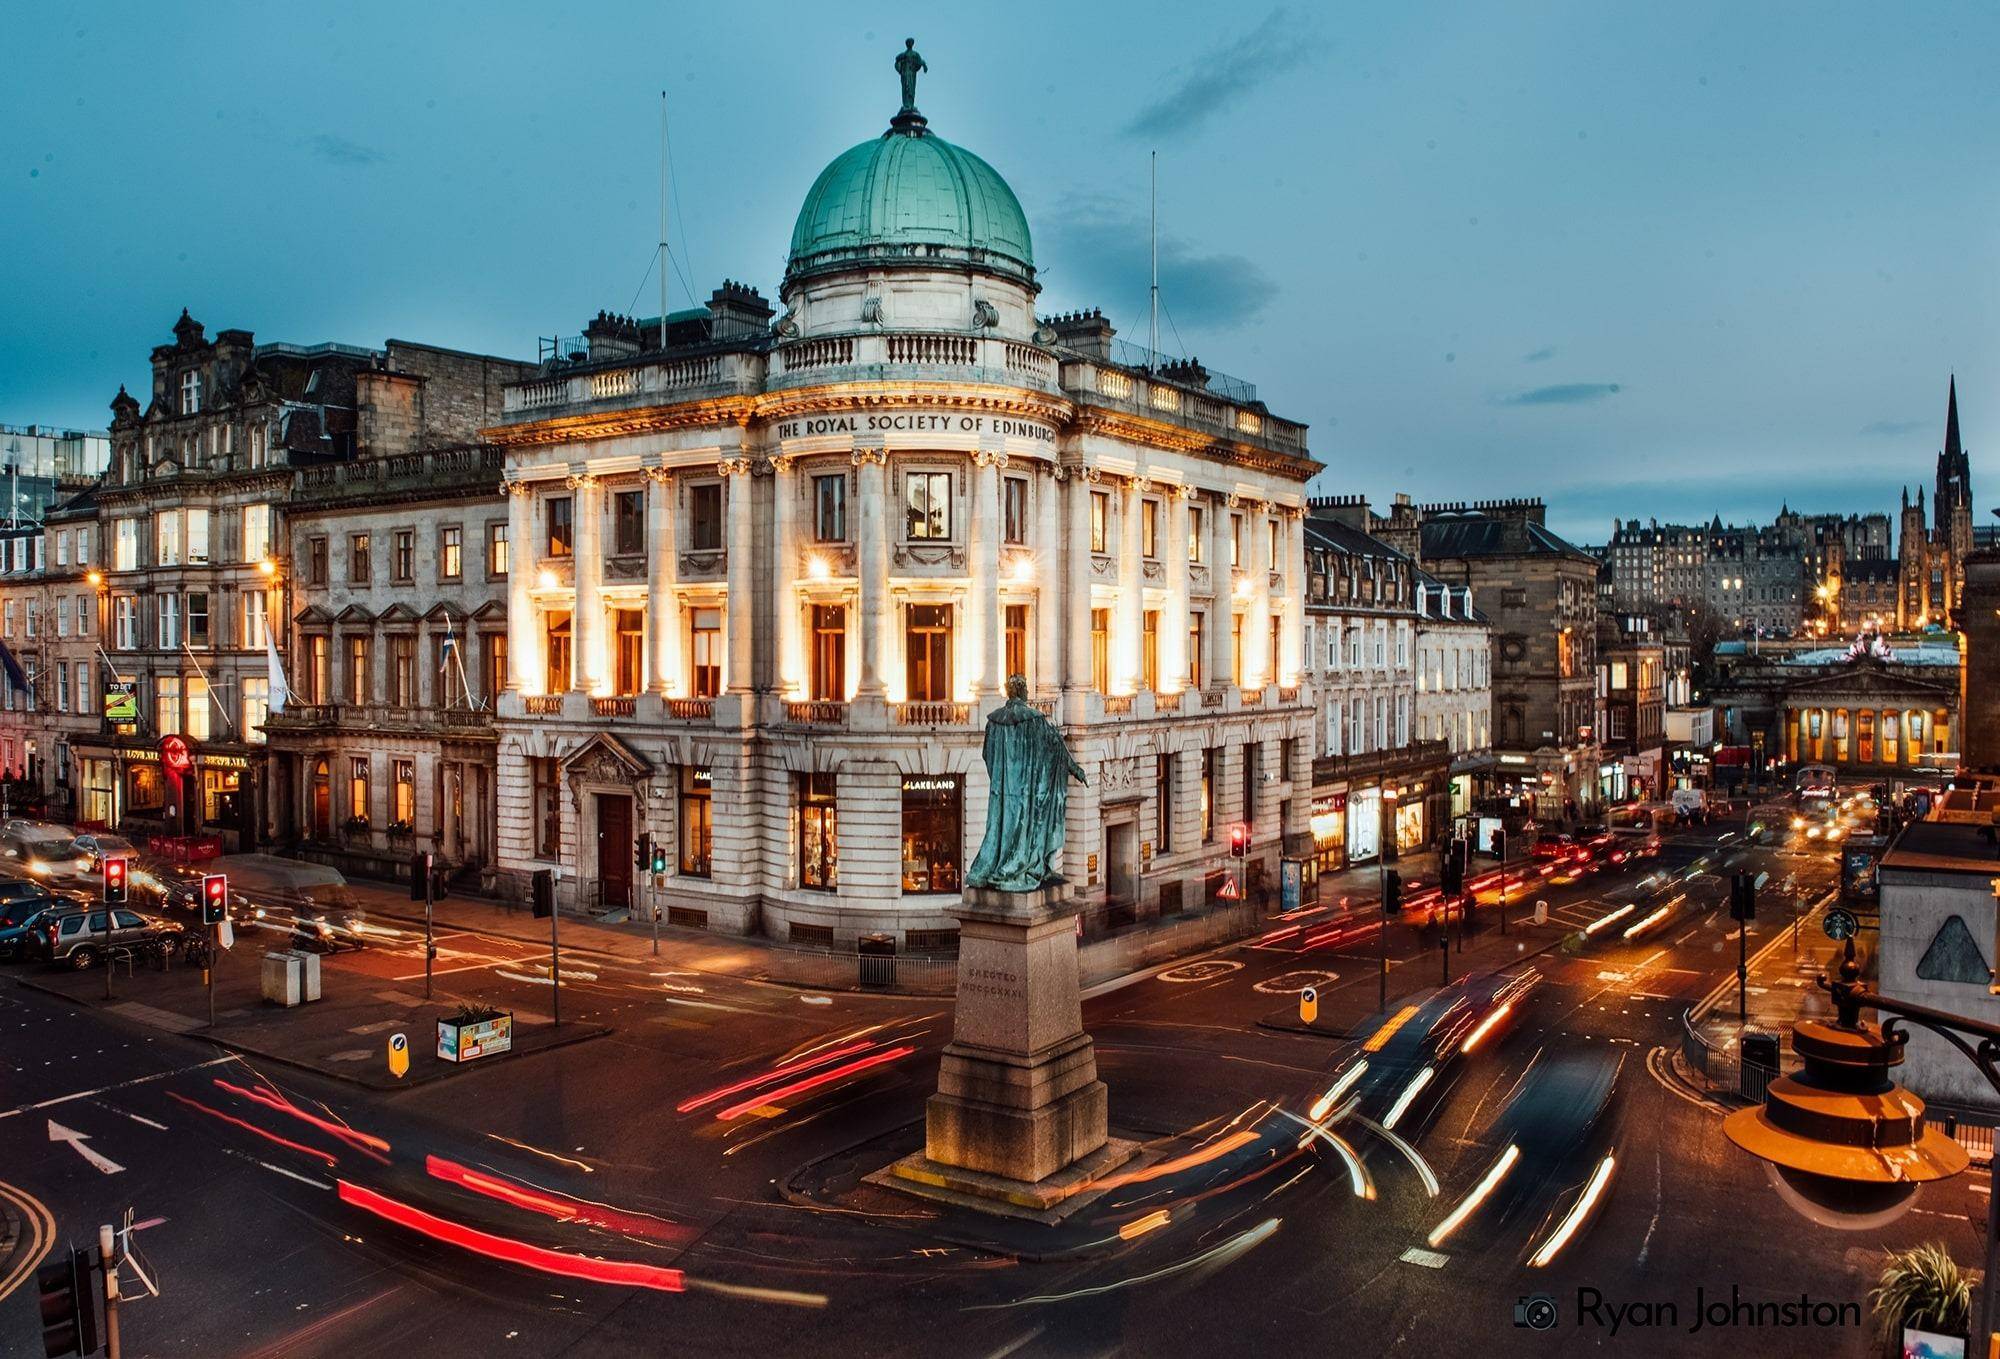 Fringe venue operator Greenside will be staging shows at the Royal Society of Edinburgh building on George Street from next August. Picture: Ryan Johnston